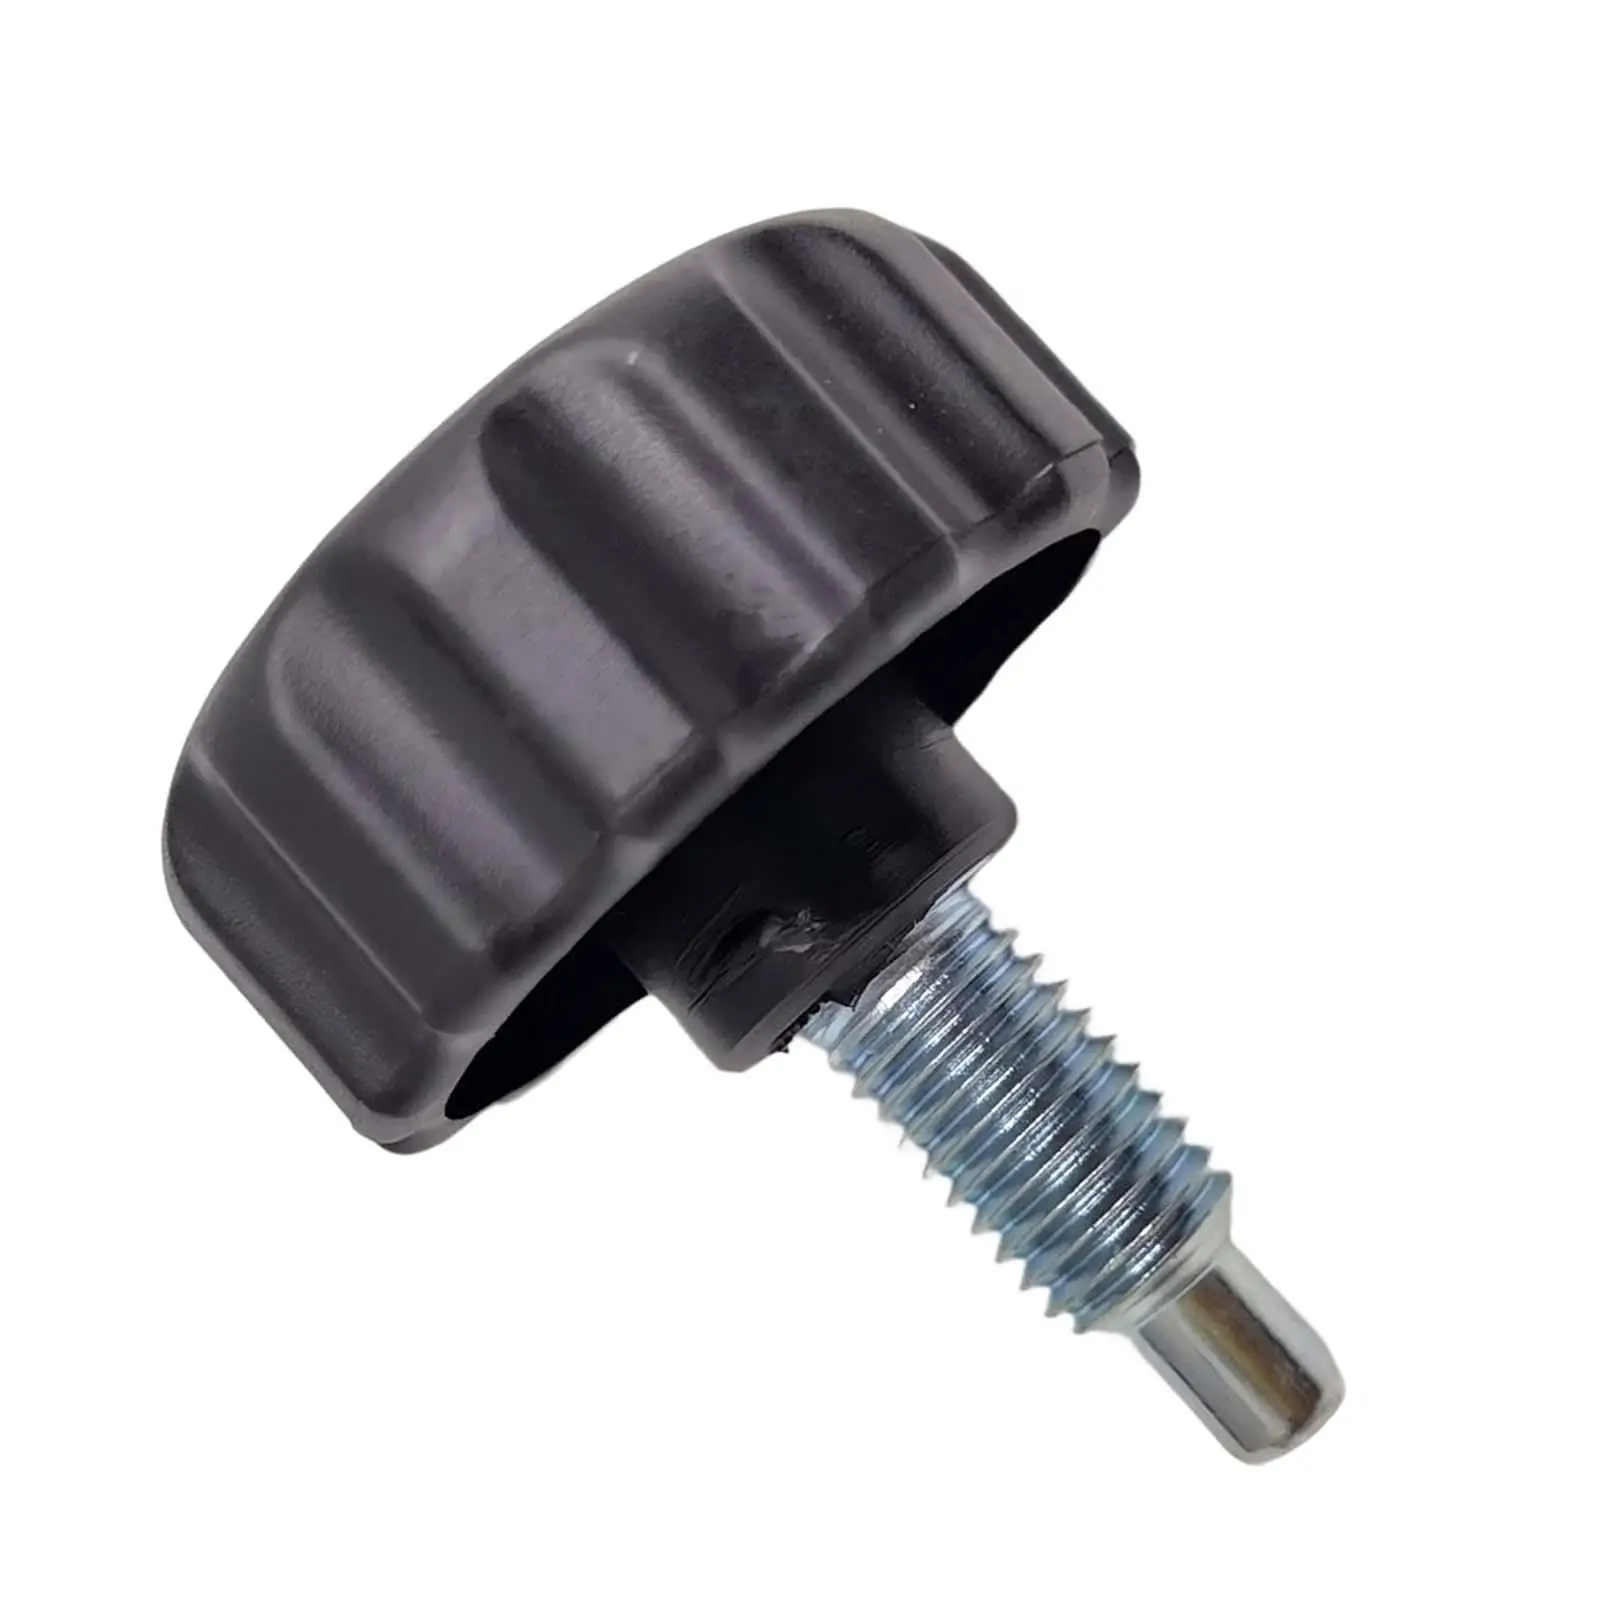 M12 Pop Pin Exercise Machines Bicycle Components Screw Pull Pin Spring Knob